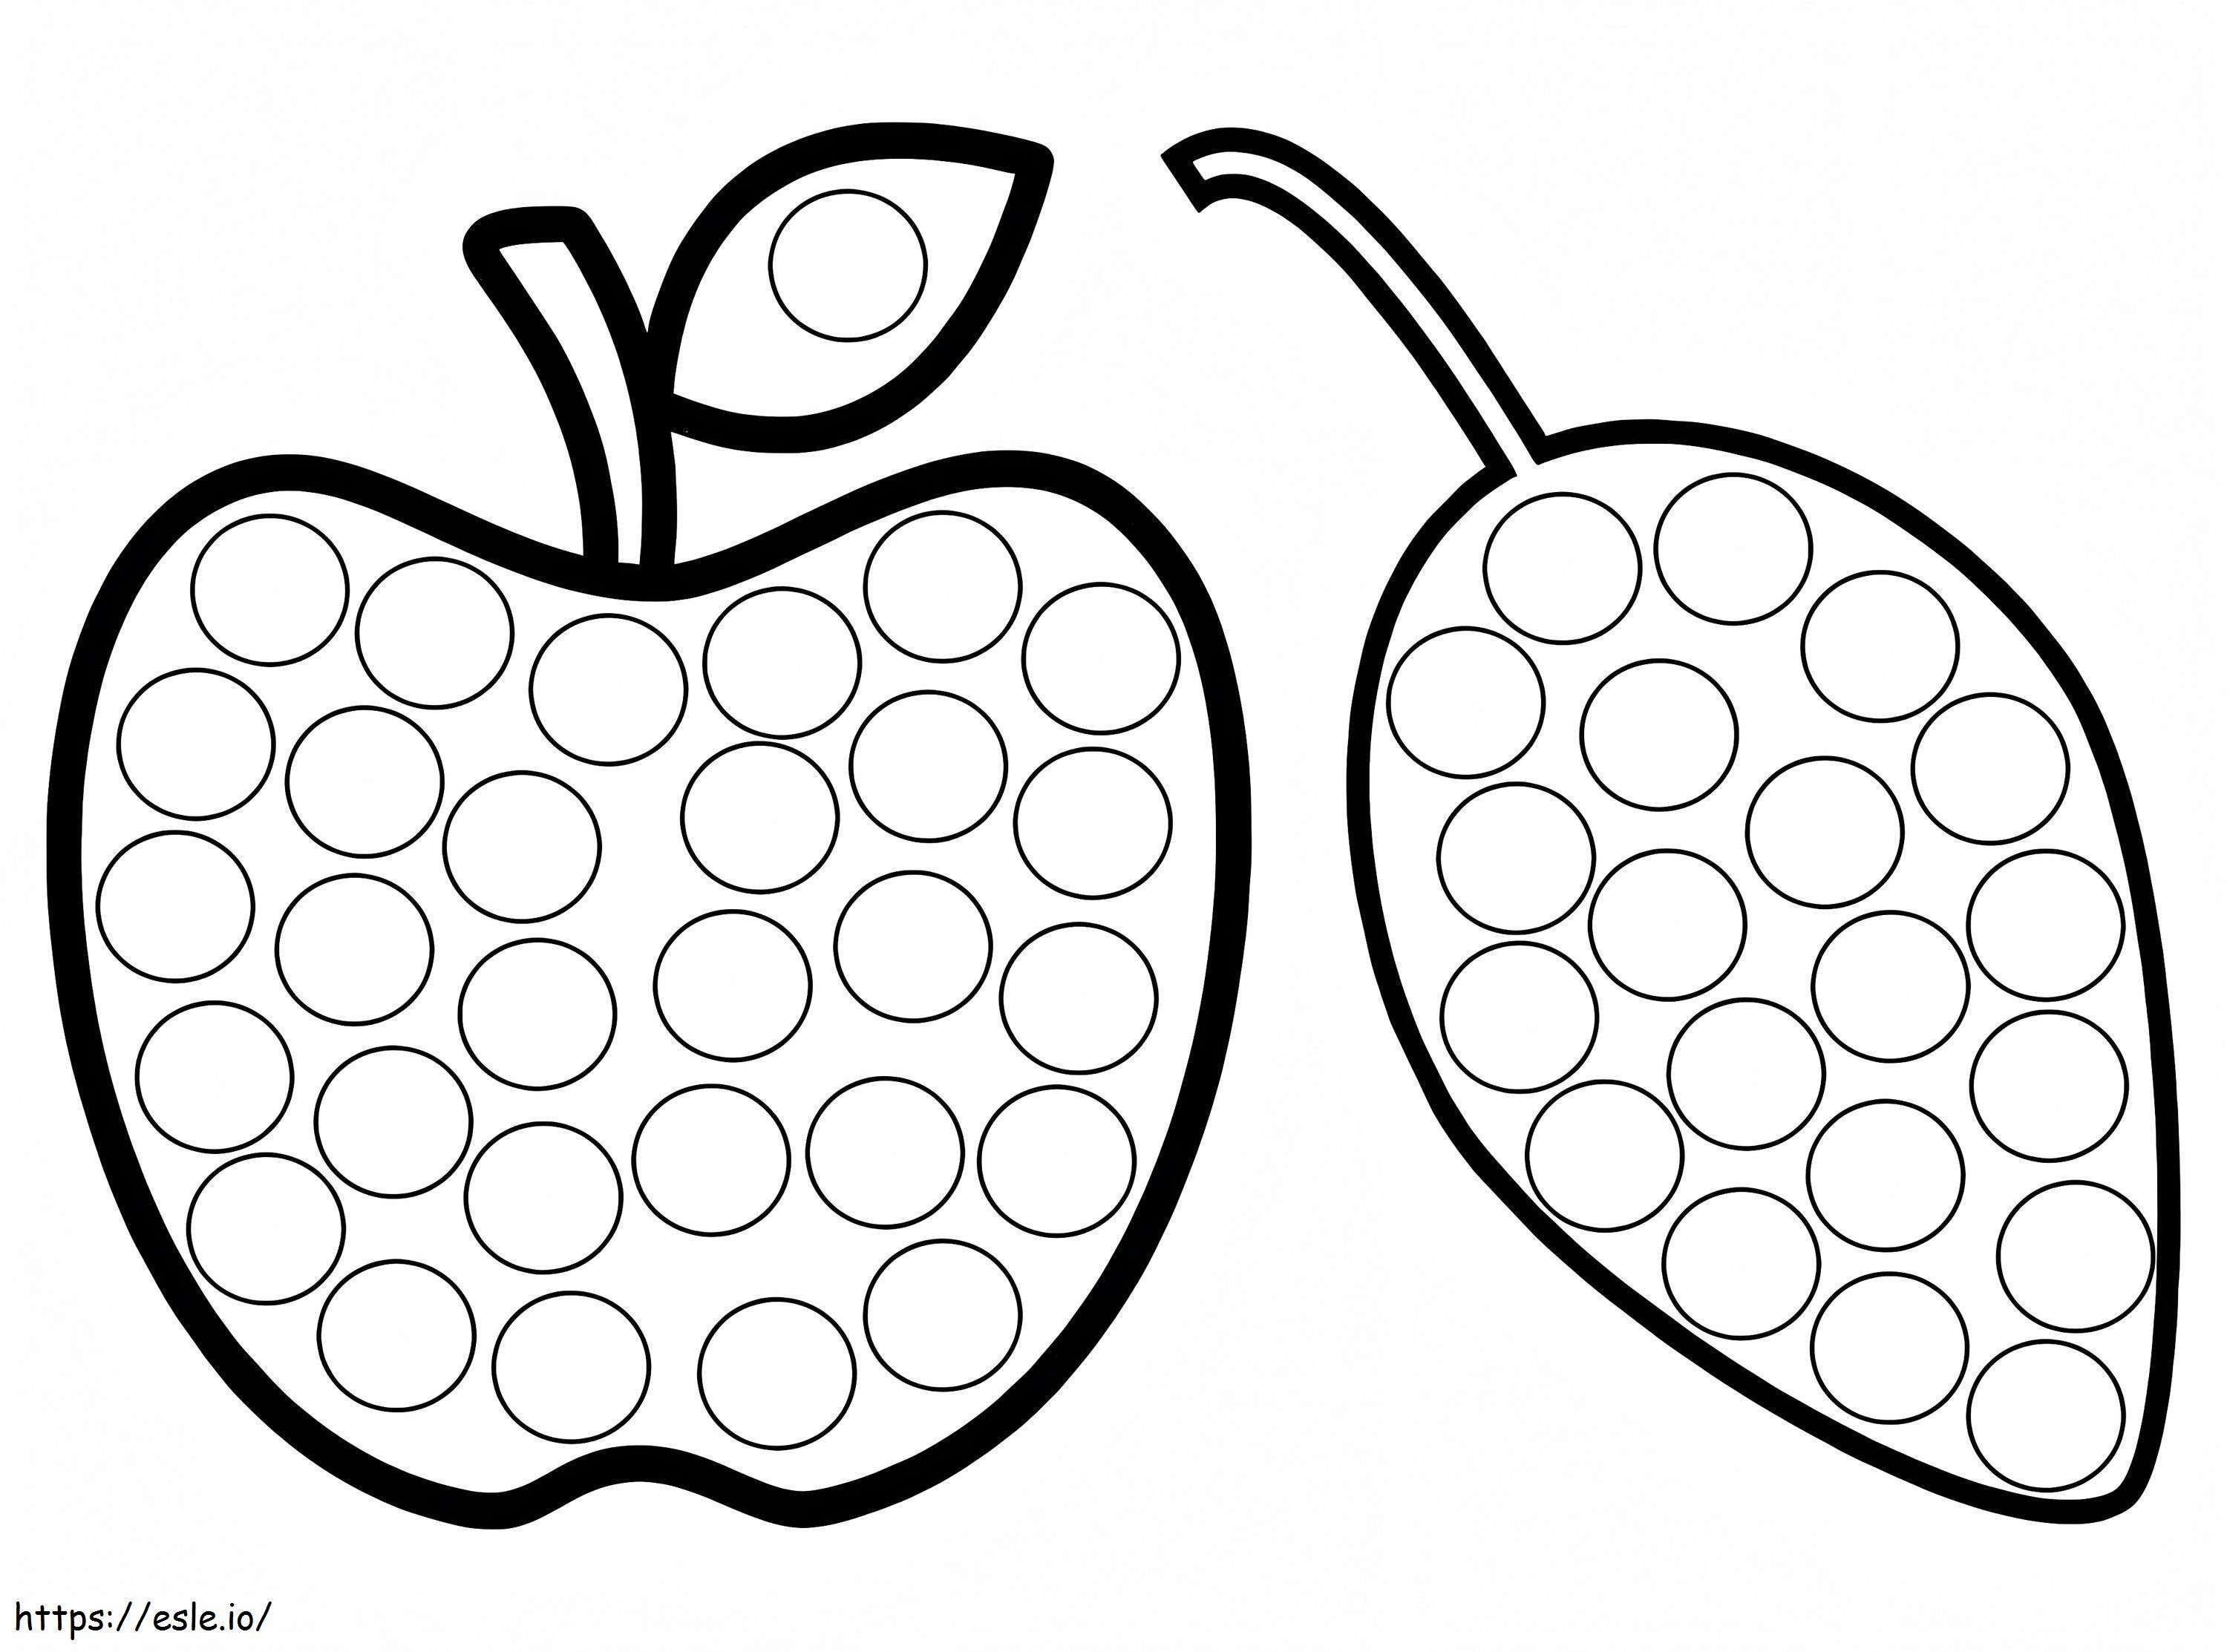 Fruits Dot Marker coloring page